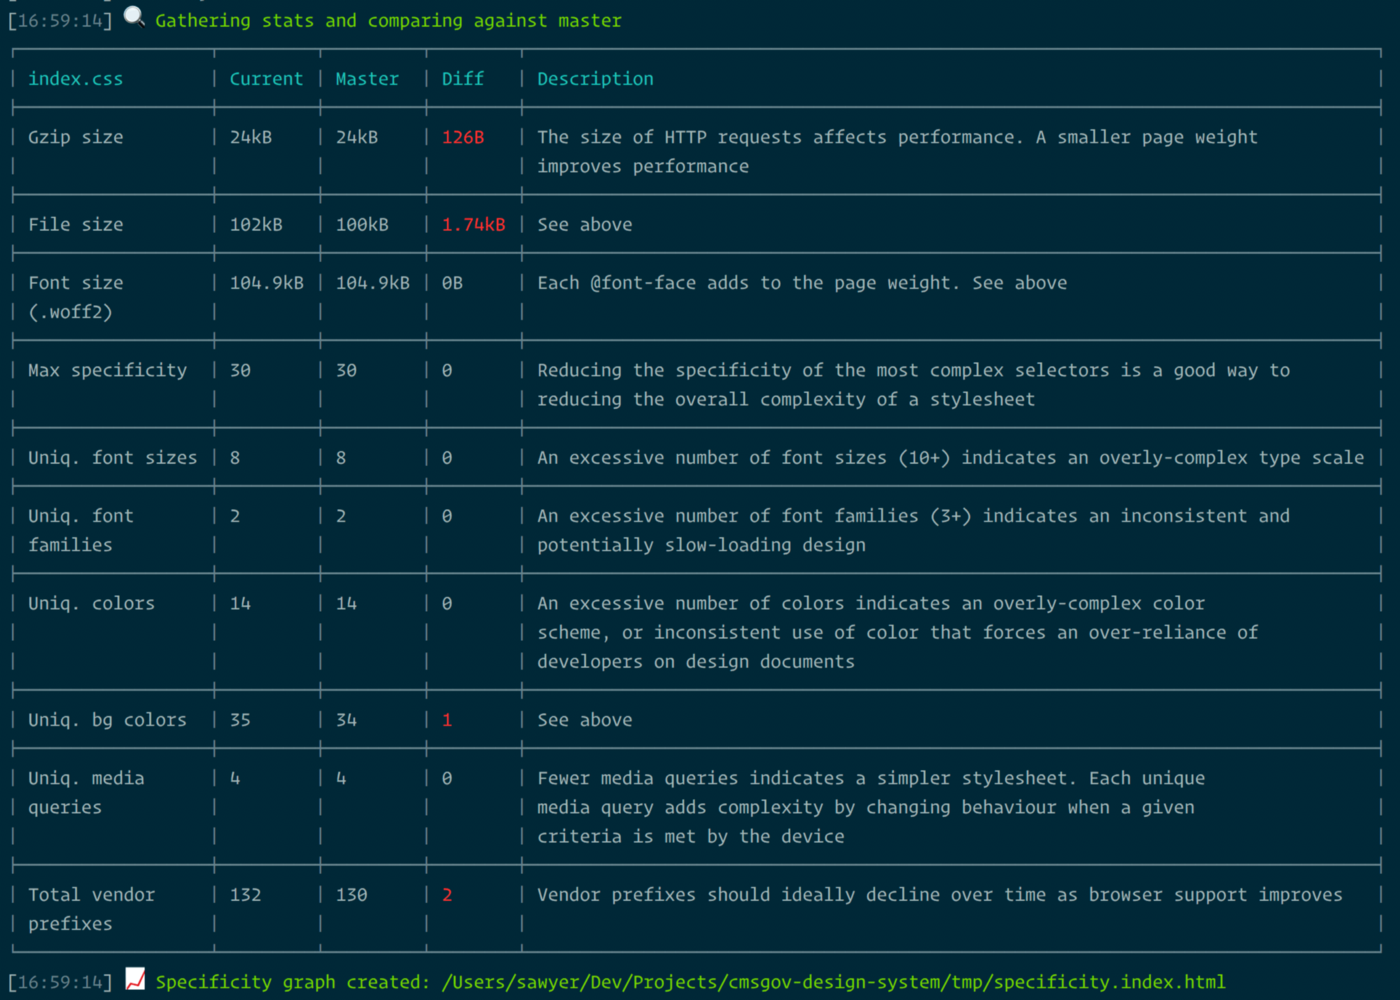 A screenshot showing a table of CSS stats.